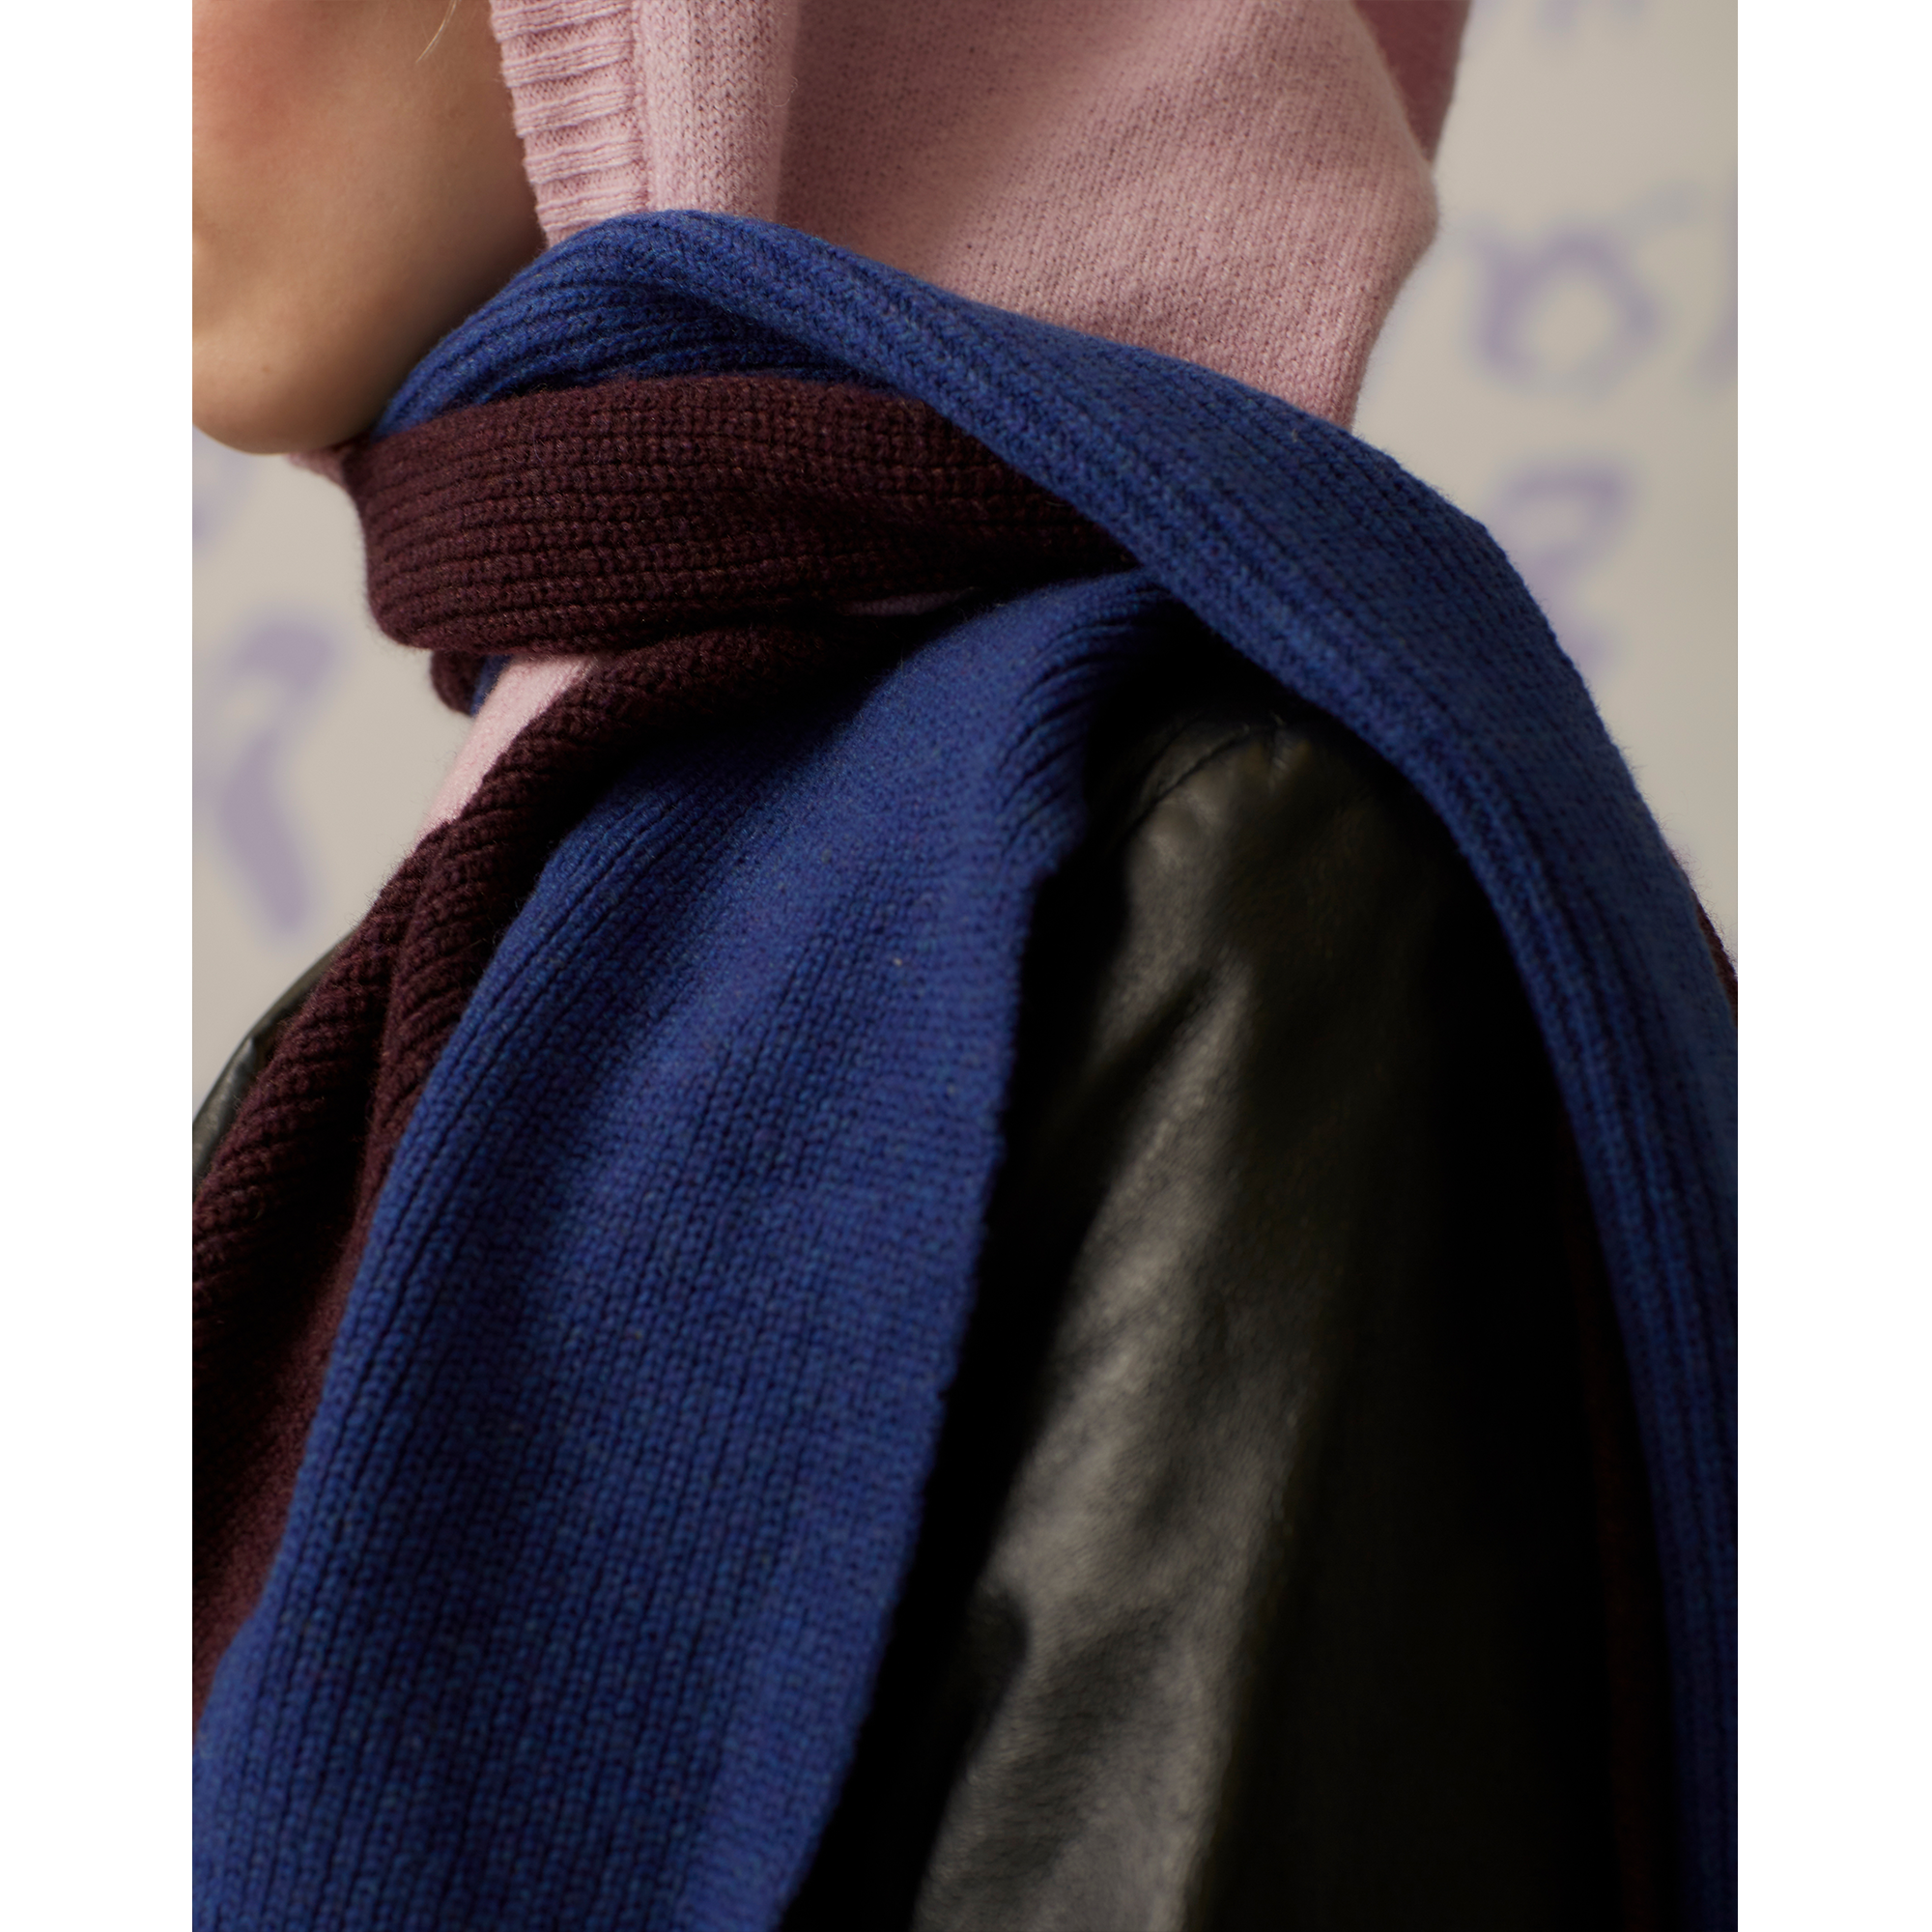 The Hooded Scarf | Pink